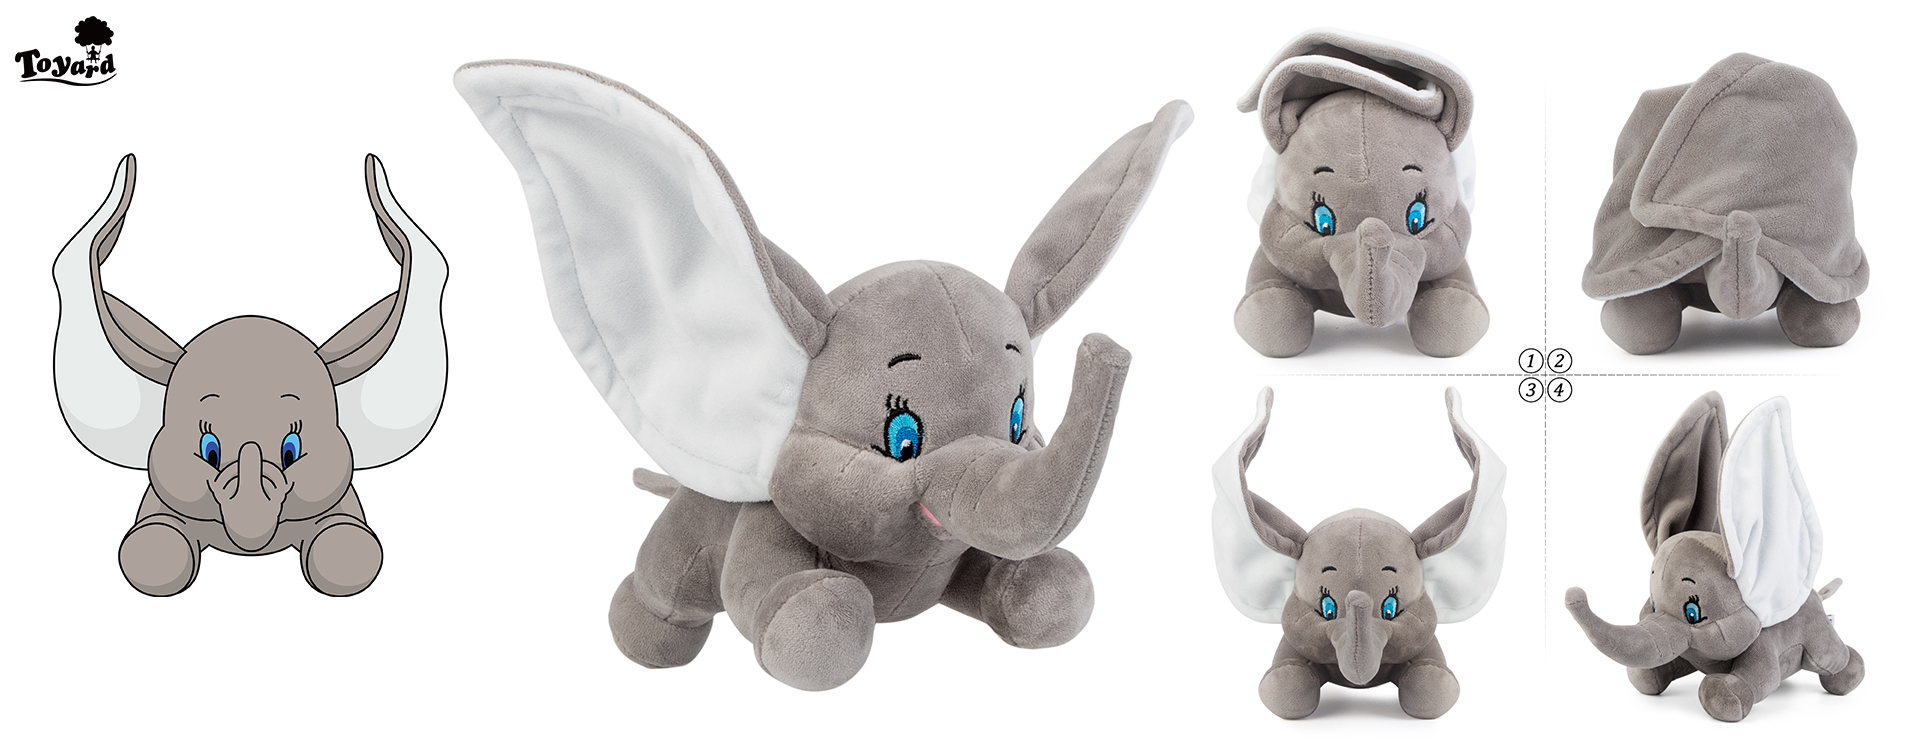 see different style about custom elephant plush toy